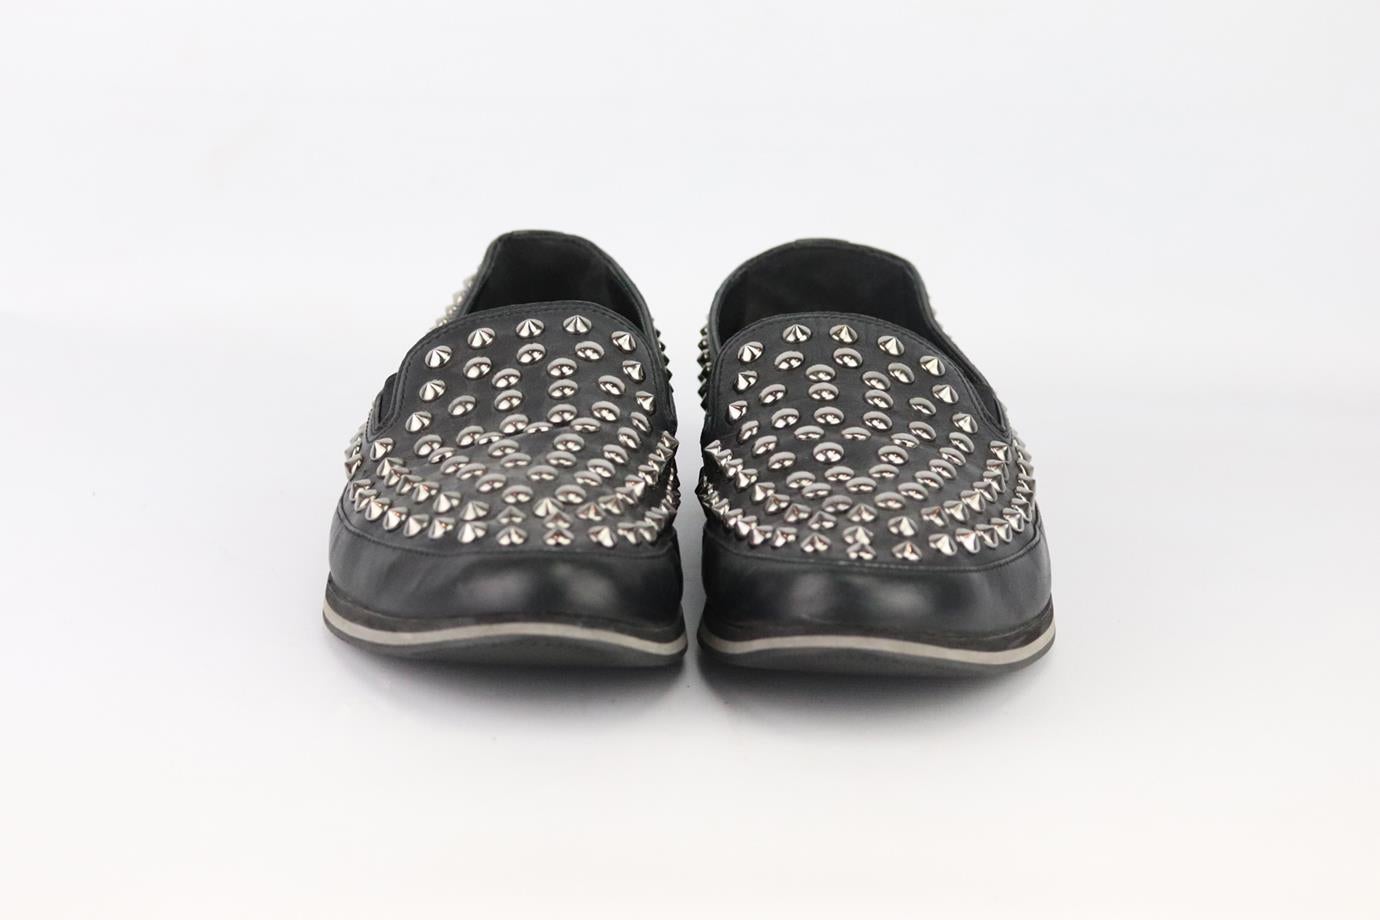 Prada studded leather slip on loafers. Made from black leather and finished with silver-tone spike detail. Black. Slip on. Does not come with box or dustbag. Size: EU 43.5 (US 9.5, UK 10.5). Insole: 11 in. Heel: 0.6 in
